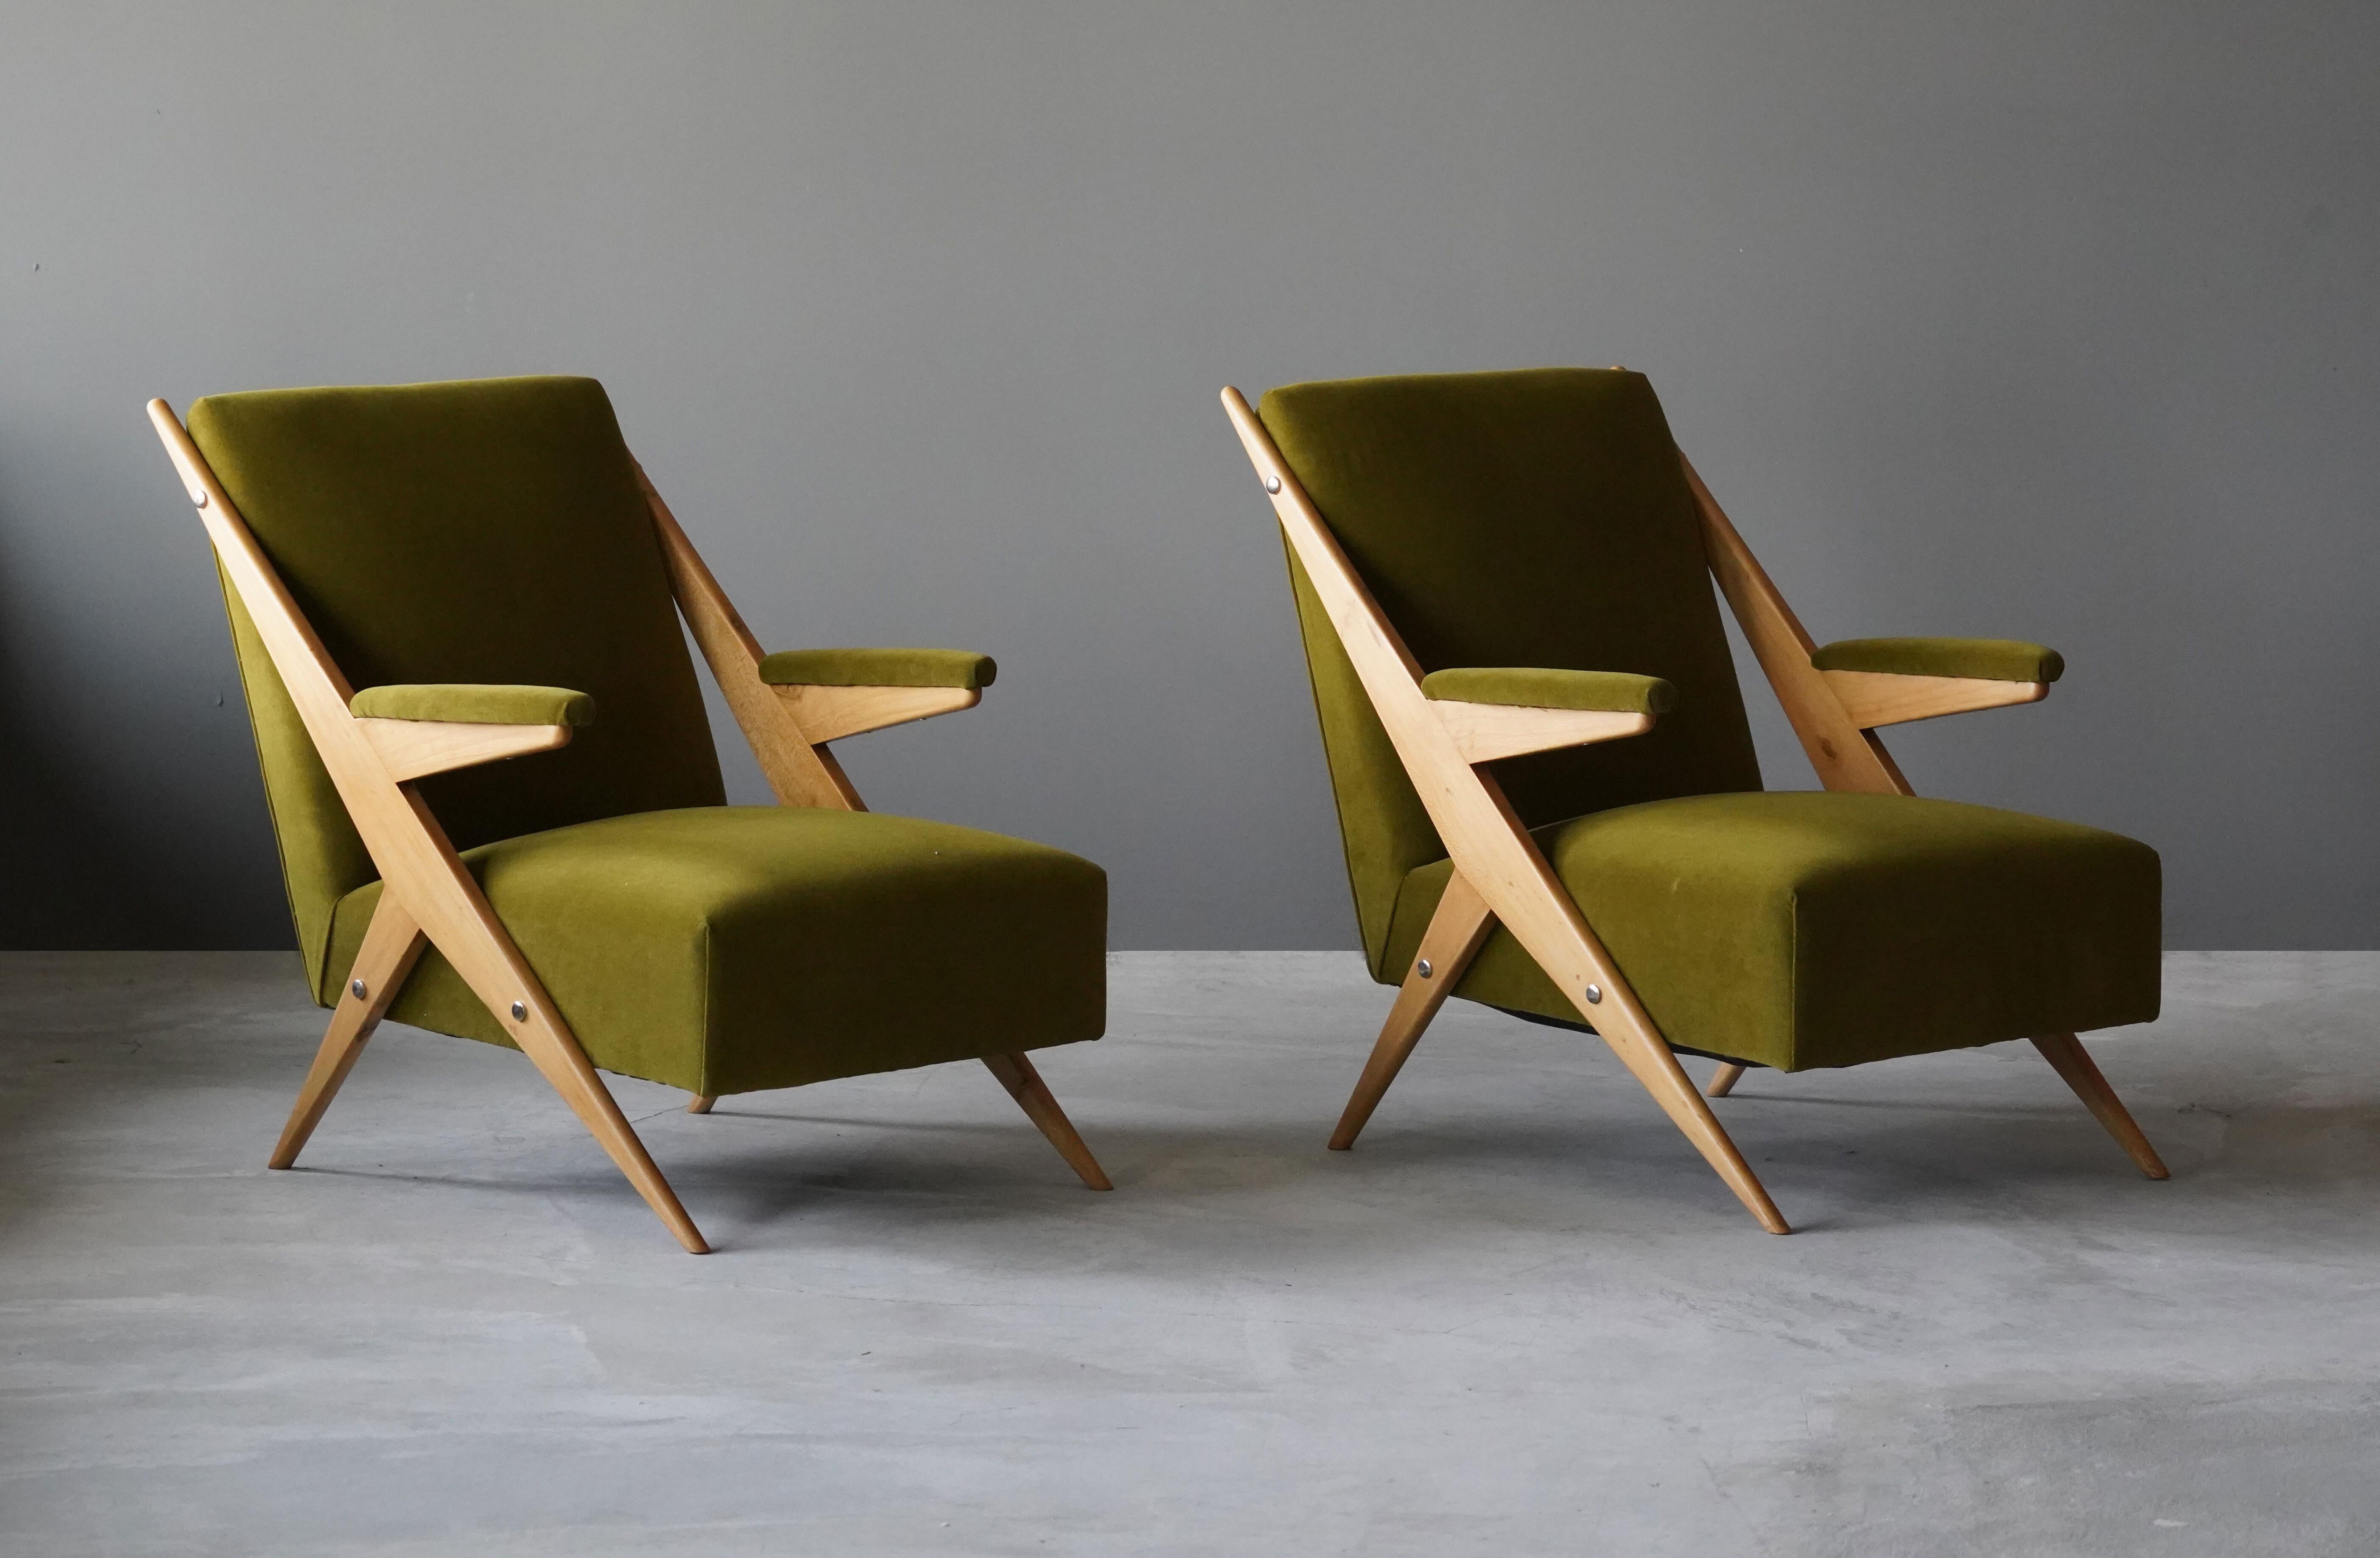 A set of highly modernist lounge chairs / armchairs. Designed and produced in Italy, 1960s. Reupholstered in a brand new high-end fabric. 

Other designers of the period include Franco Albini, Gio Ponti, Zanine Caldas, Ico Parisi, Osvaldo Borsani,